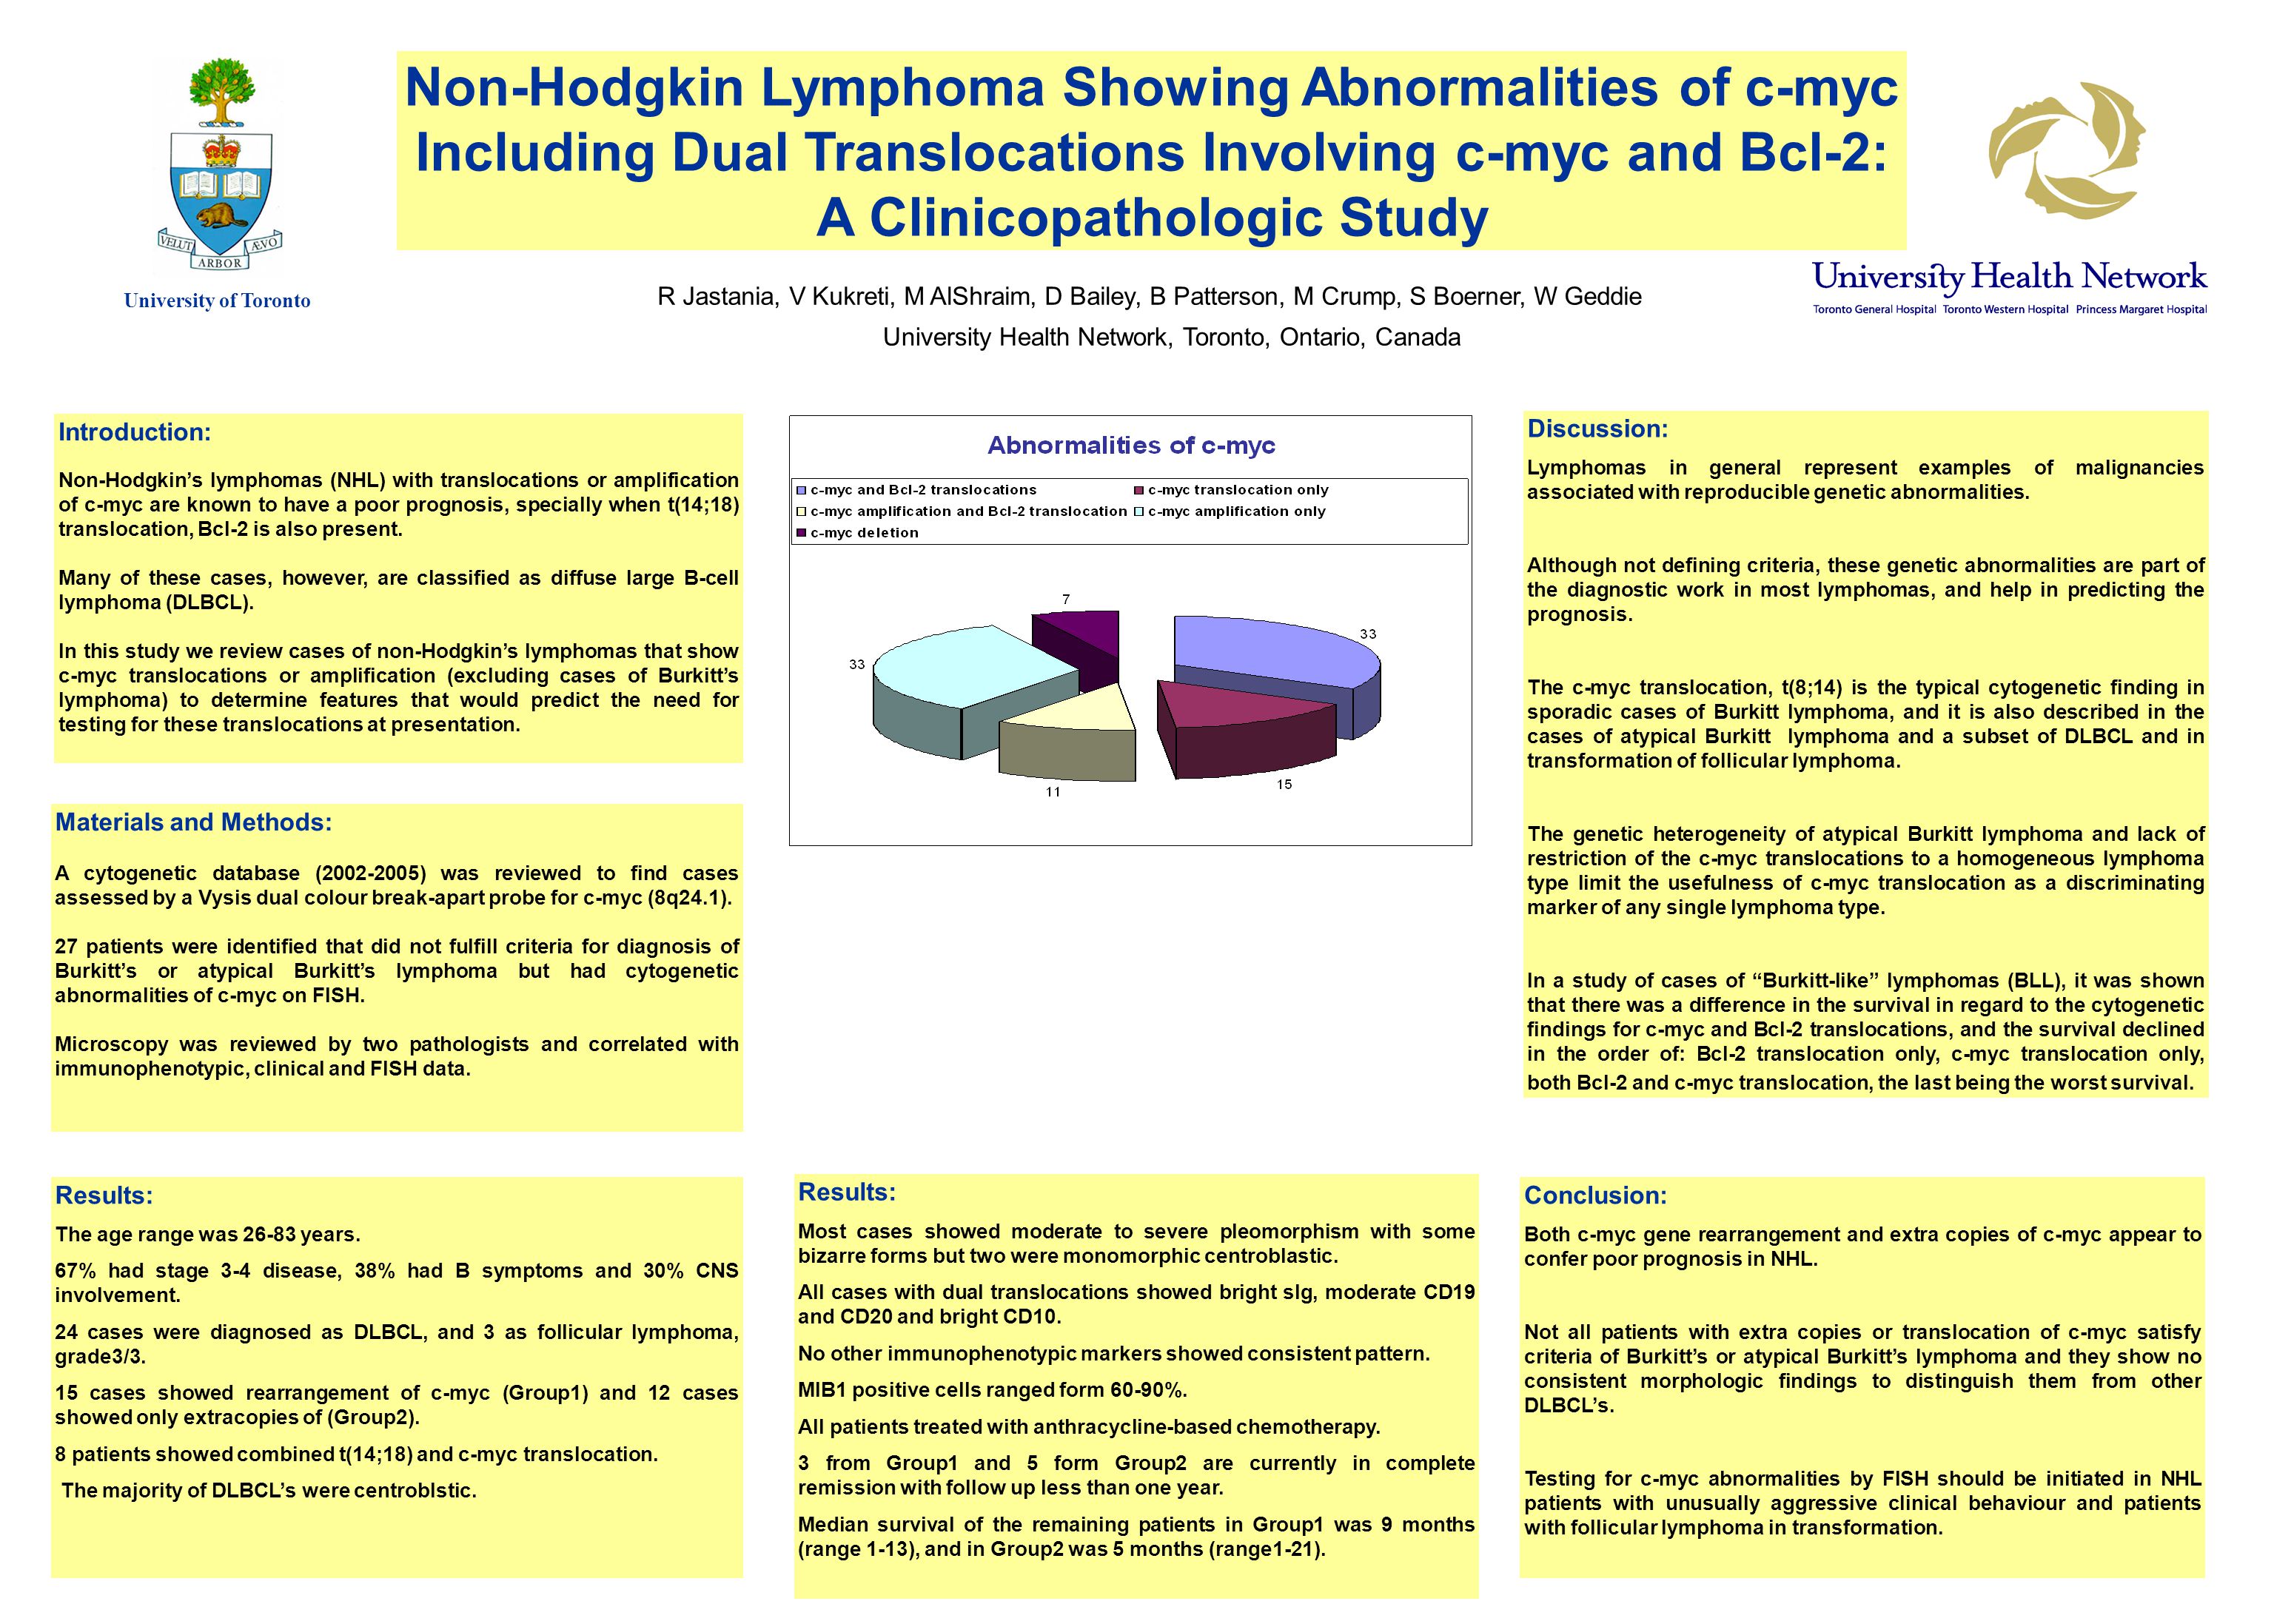 Non-Hodgkin Lymphoma Showing Abnormalities of c-myc Including Dual Translocations Involving c-myc and Bcl-2: A Clinicopathologic Study R Jastania, V Kukreti, M AlShraim, D Bailey, B Patterson, M Crump, S Boerner, W Geddie University Health Network, Toronto, Ontario, Canada Introduction: Non-Hodgkin’s lymphomas (NHL) with translocations or amplification of c-myc are known to have a poor prognosis, specially when t(14;18) translocation, Bcl-2 is also present.